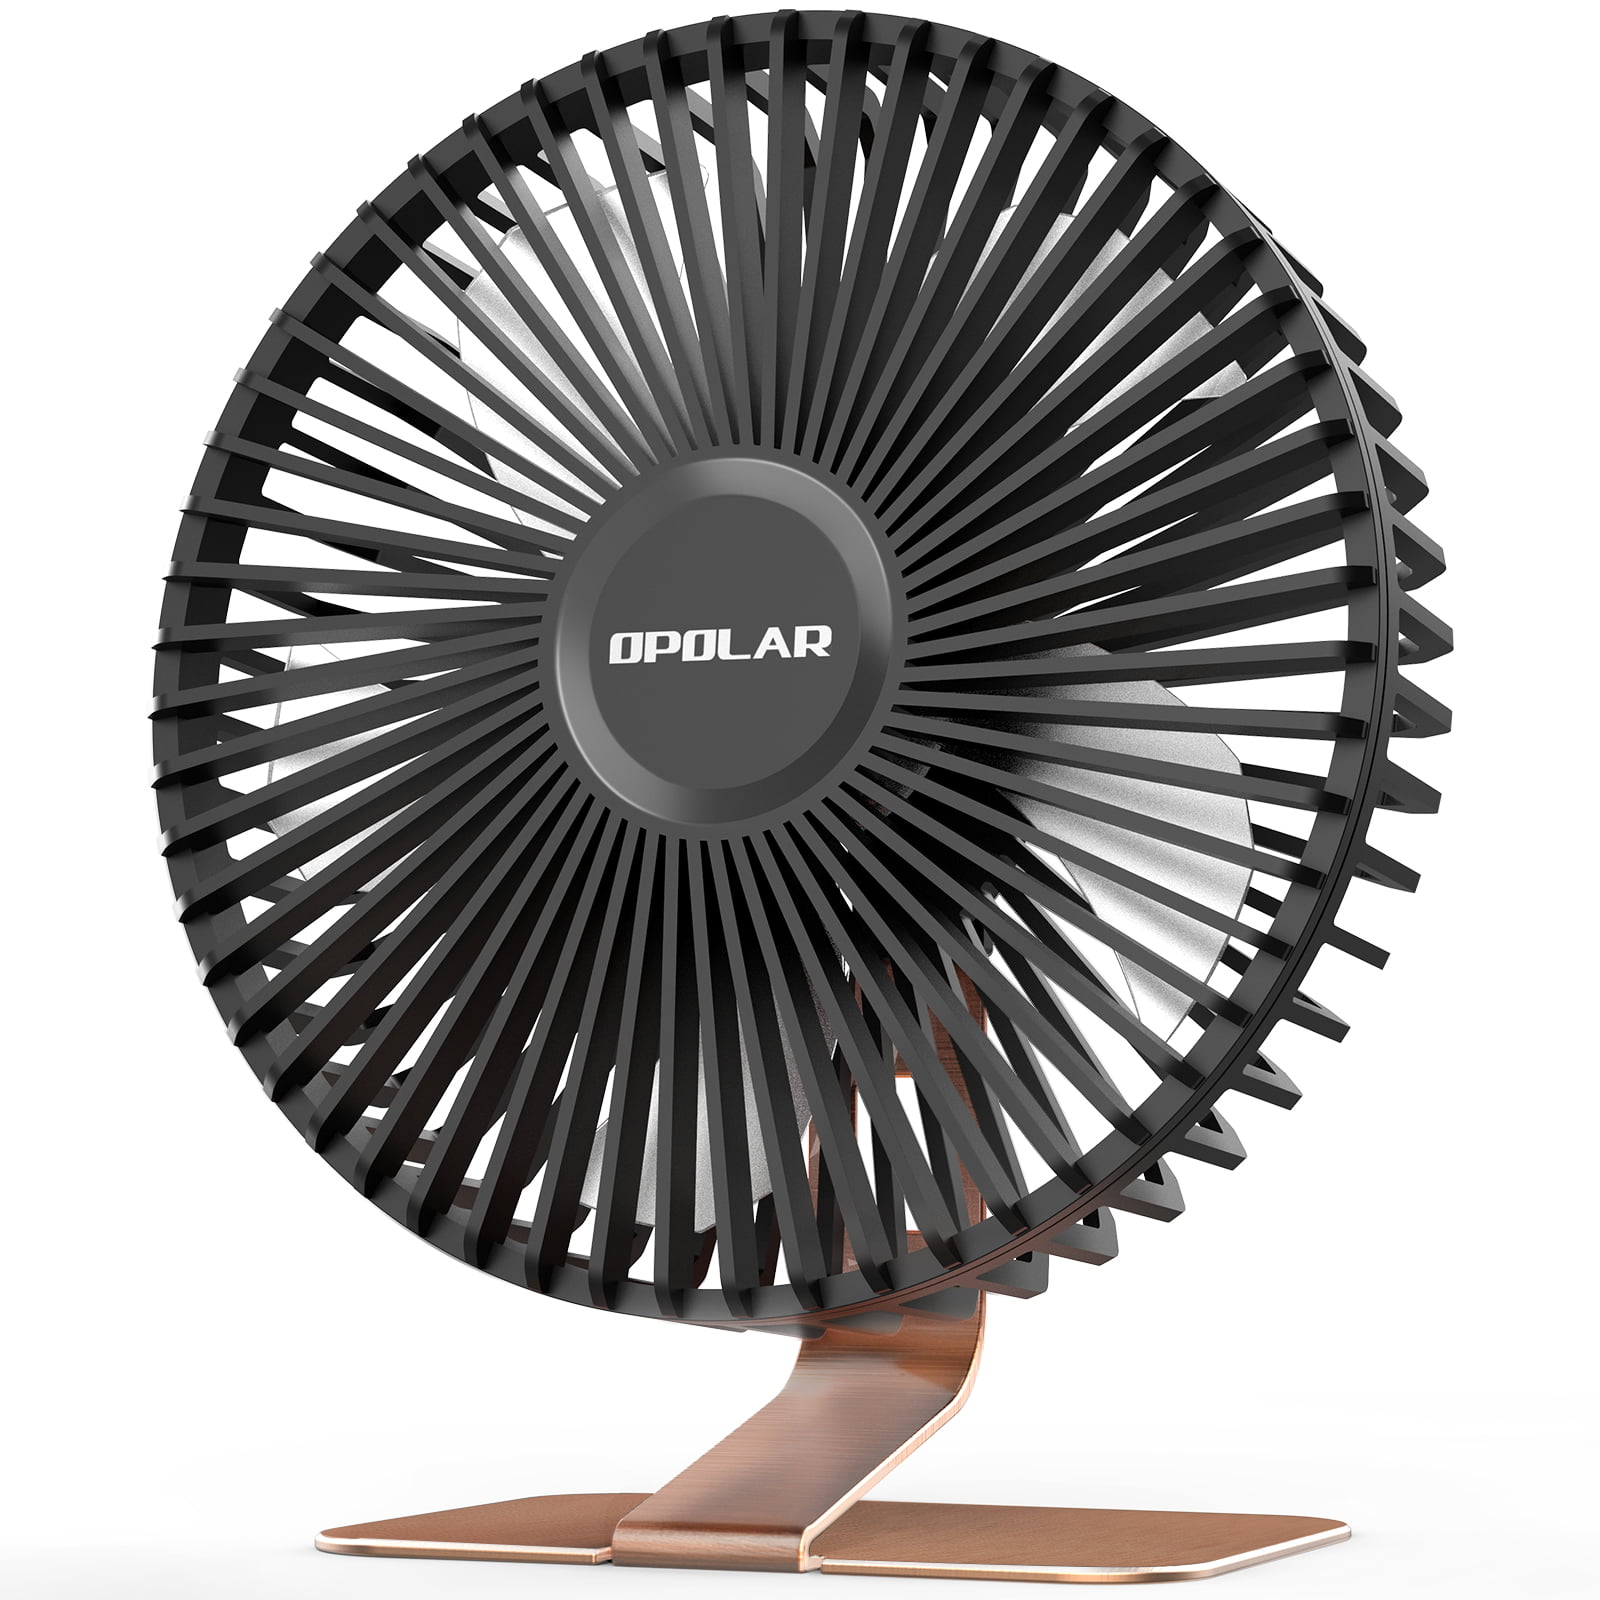 Table Desk Personal Fan with Two Speeds Powerful Airflow Whisper Quite Operation for Home Office Camping COMLIFE 9 Inch Battery Operated & USB Powered Metal Desk Fan 